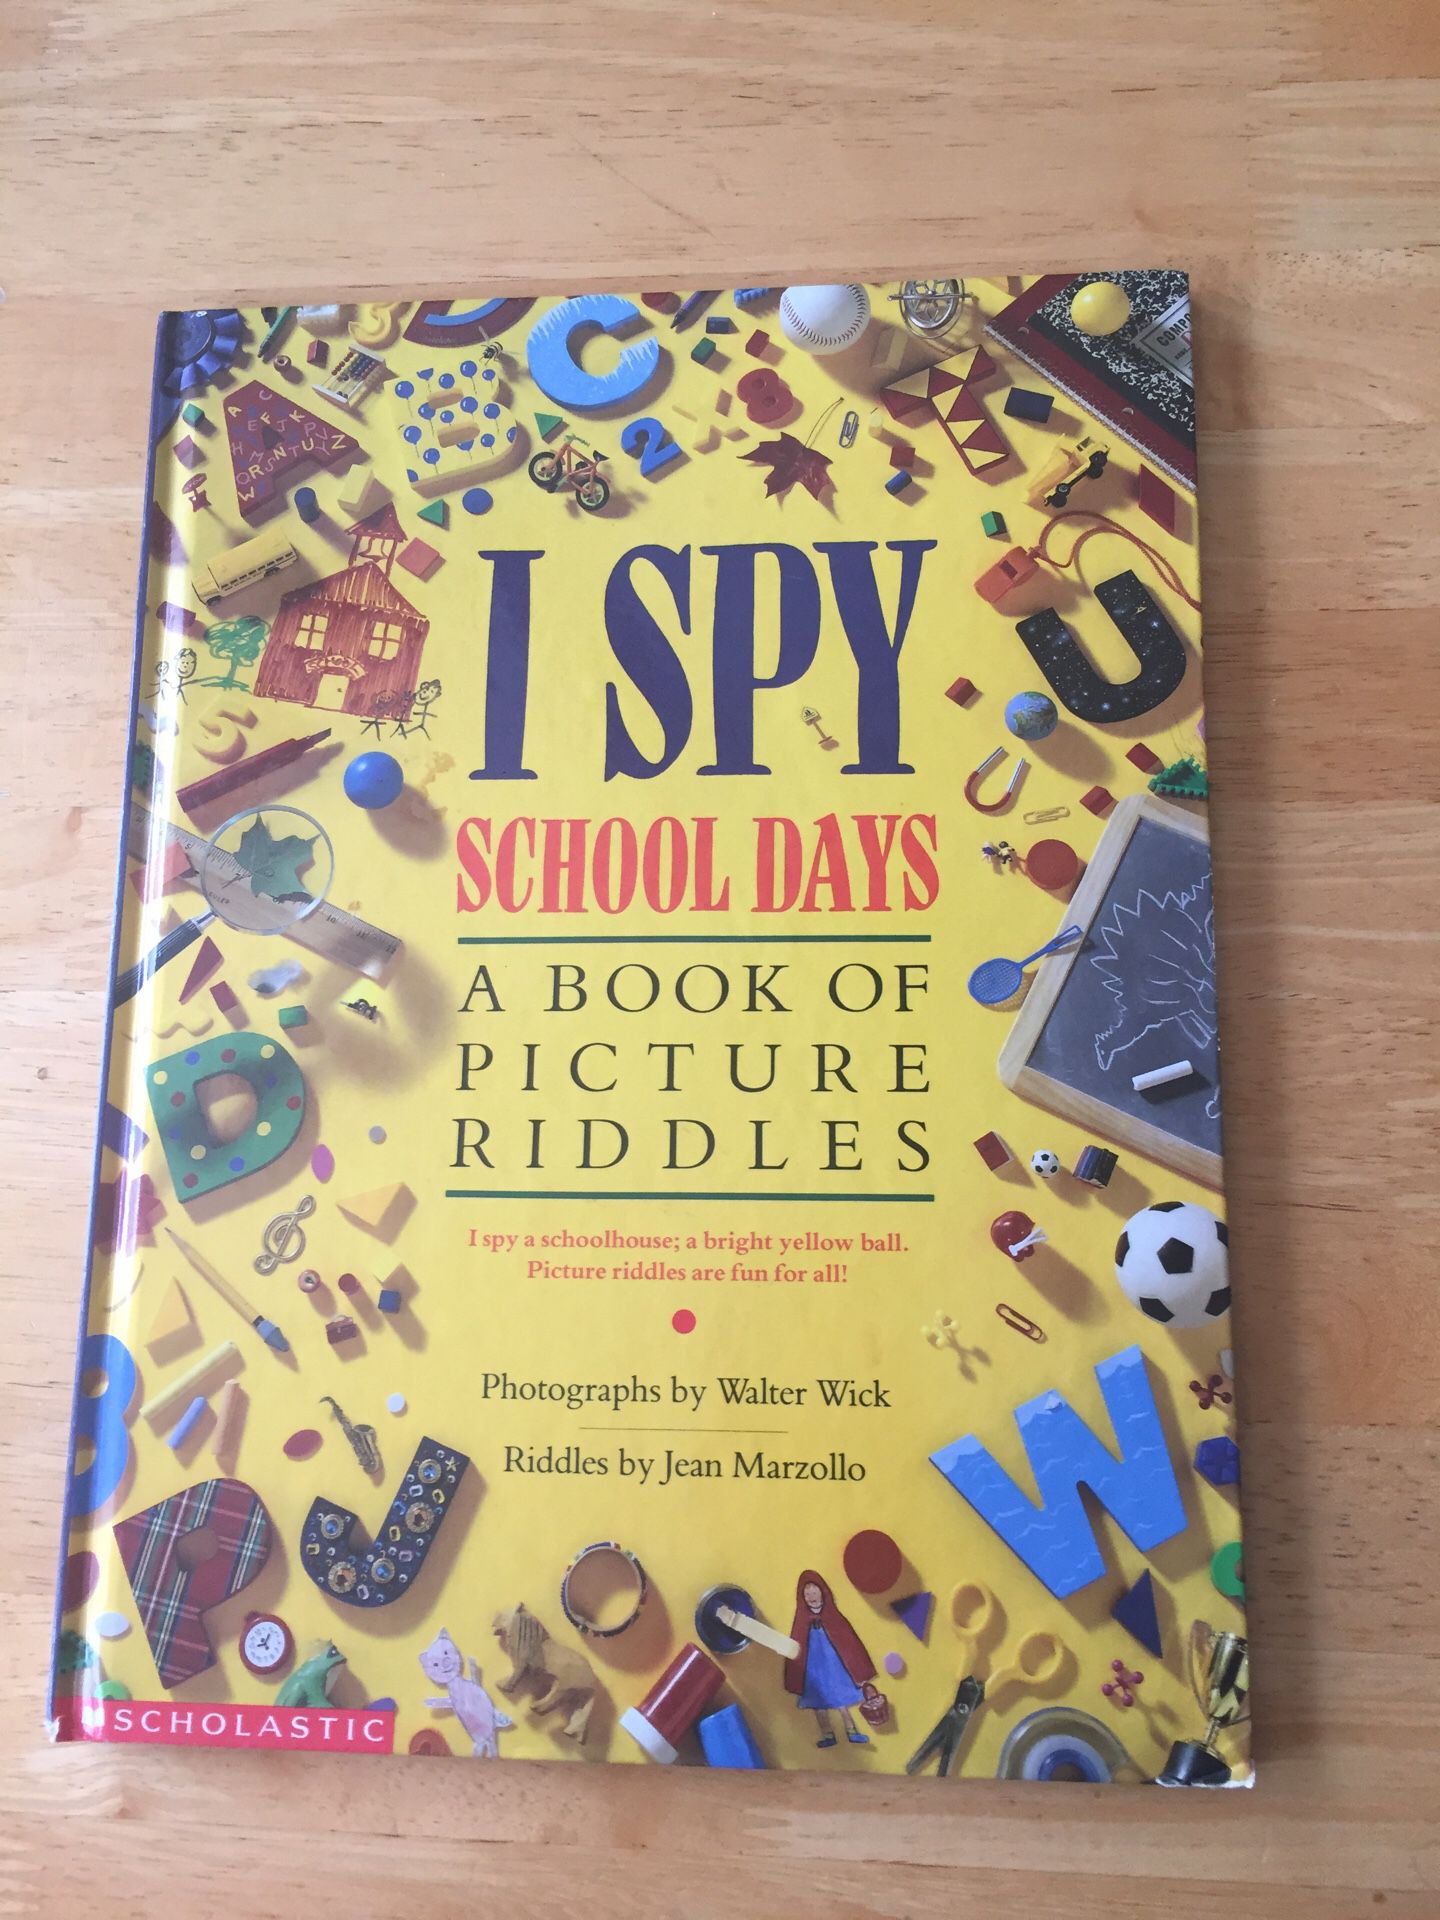 I Soy School Days - A Book of Picture Riddles